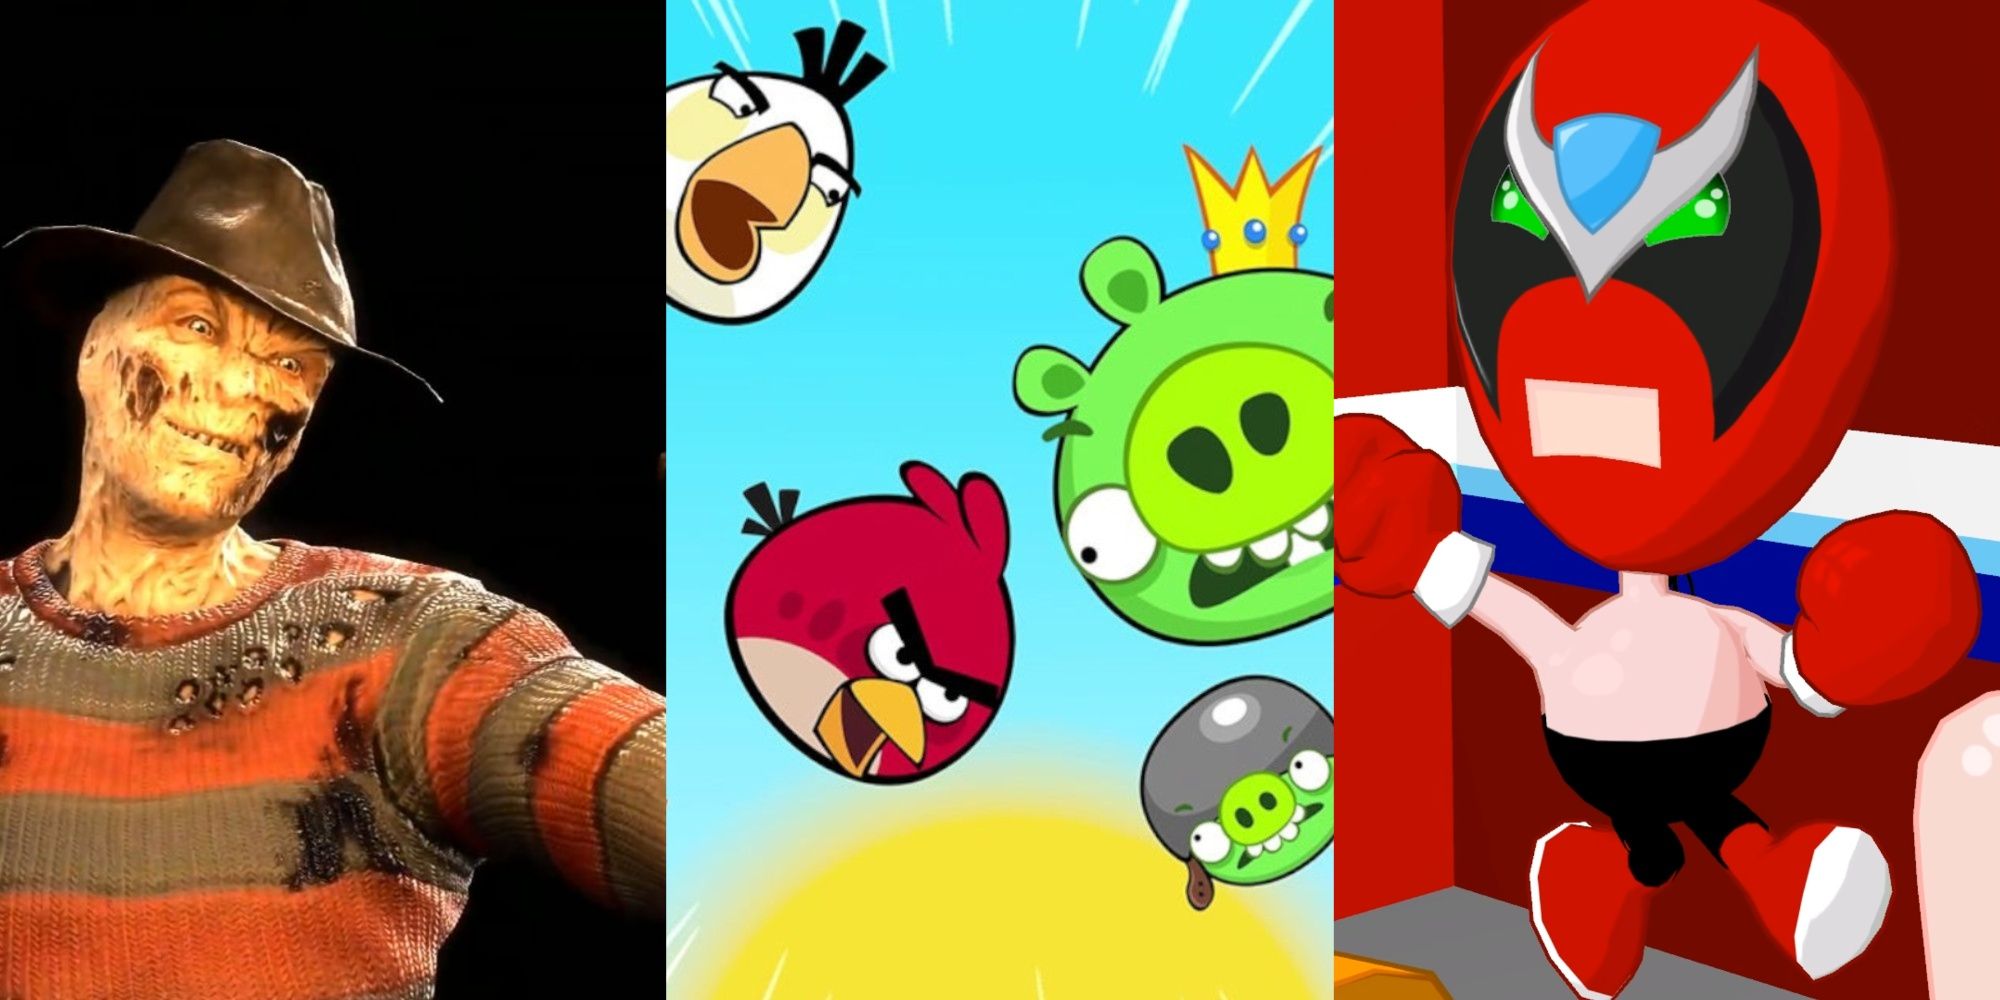 Freddy from Mortal Kombat 9, characters in Angry Birds 1, and Strong Bad from SBCG4AP